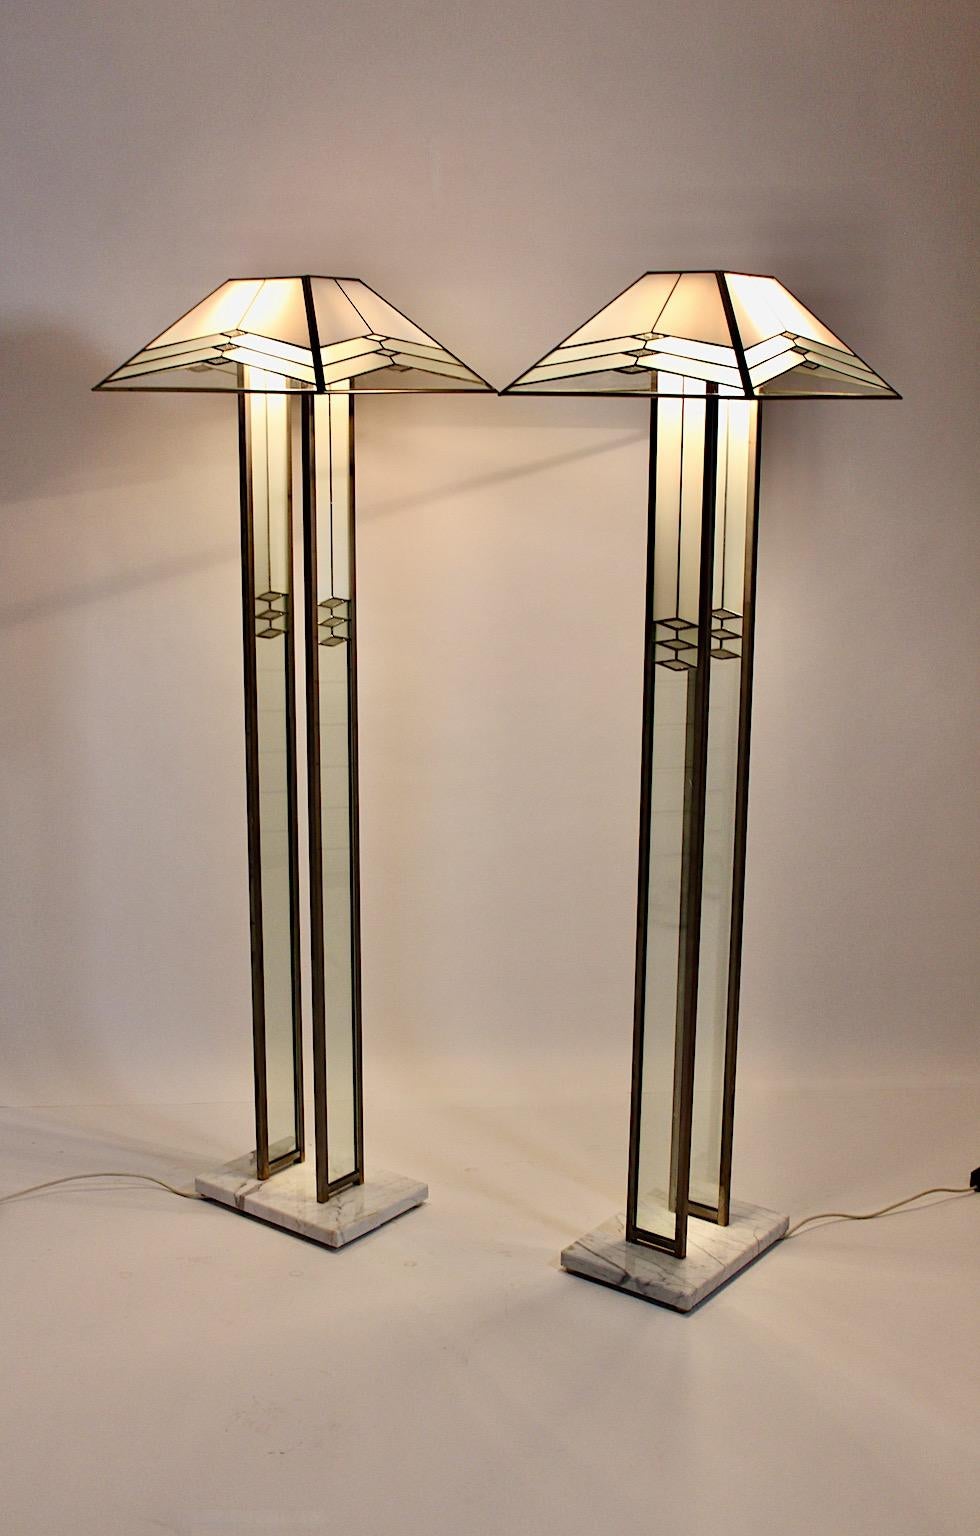 20th Century Modern Italian Vintage Marble Glass Metal Floor Lamps Duo Pair Poliarte 1980s For Sale